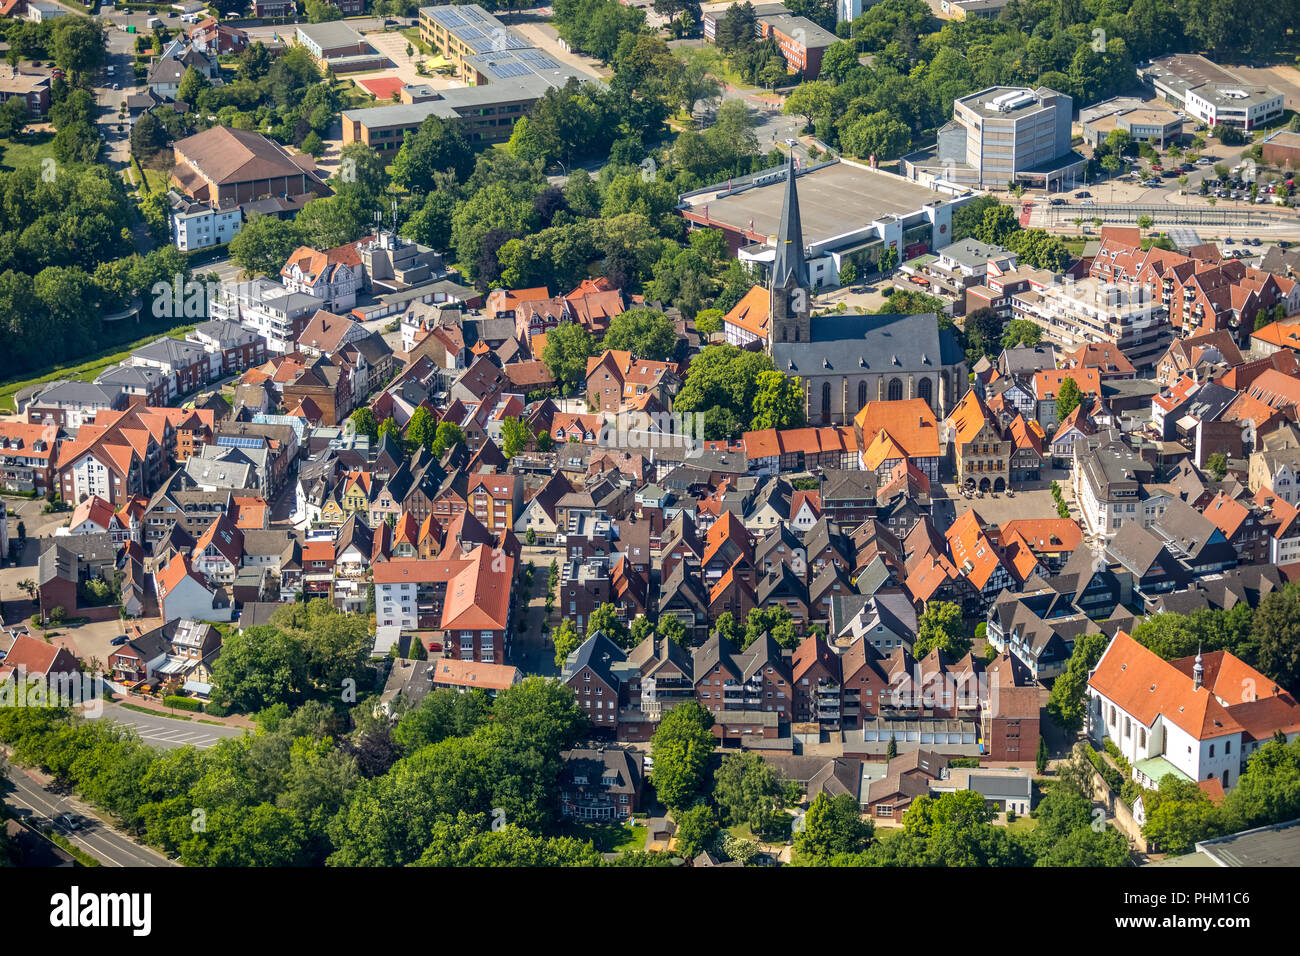 Aerial view, city centre of Werne, St. Christophorus church, market, cemetery, city, city centre, overview, Werne, Ruhr area, North Rhine-Westphalia,  Stock Photo